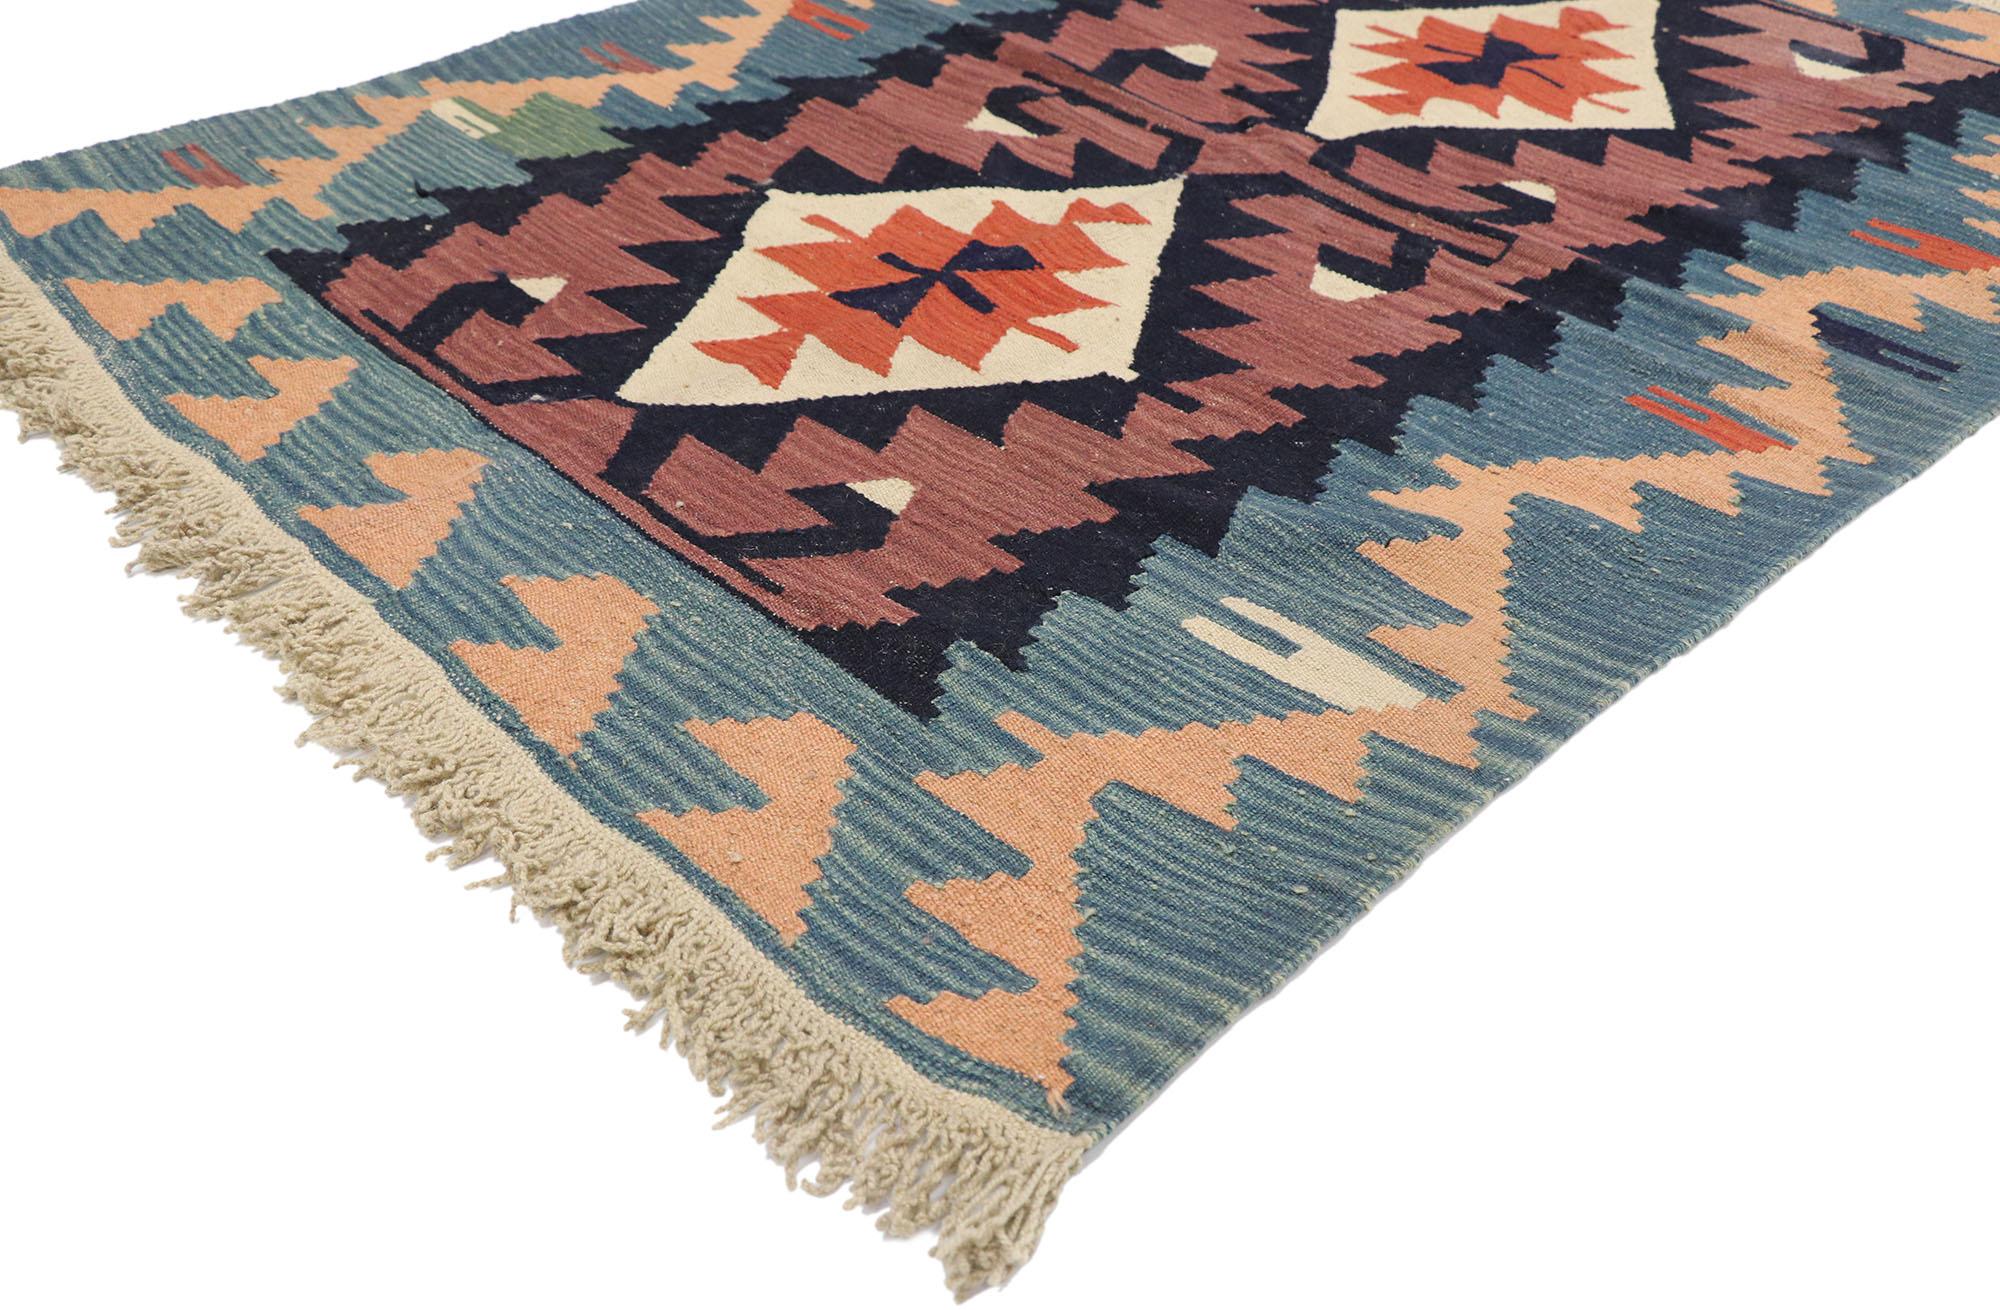 77819, vintage Persian Shiraz Kilim rug with boho chic Tribal style. Full of tiny details and a bold expressive design combined with vibrant colors and tribal style, this hand-woven wool vintage Persian Shiraz kilim rug is a captivating vision of